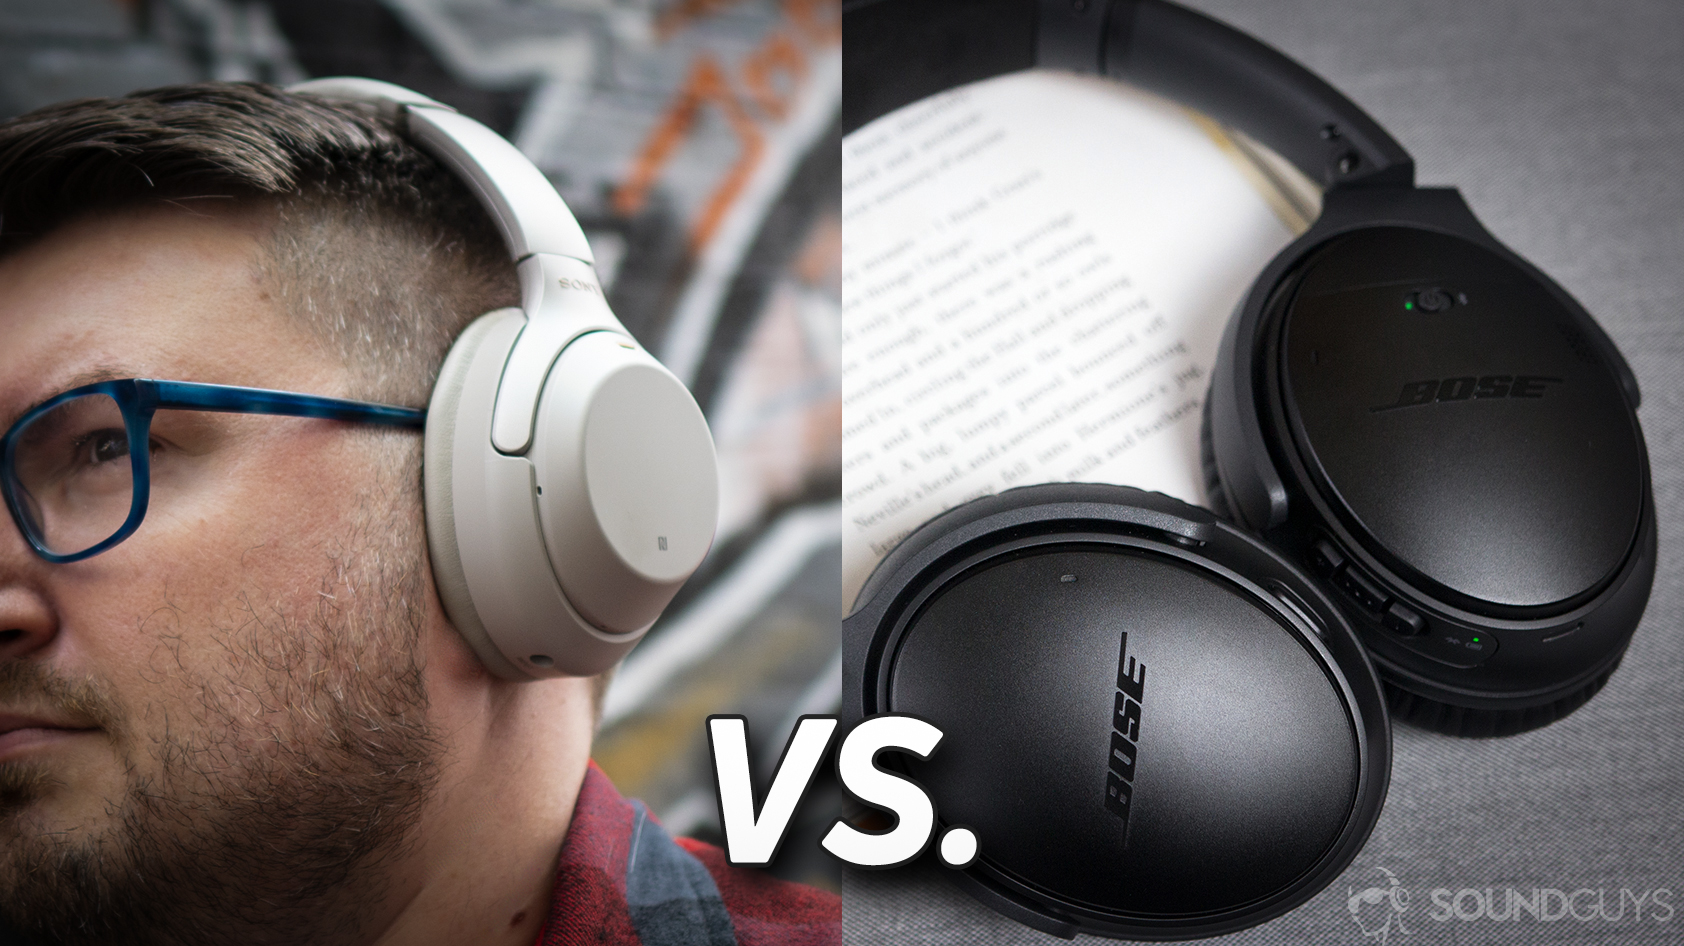 Bose QC35 II, Sony WH-1000 XM3 Noise-Cancelling Headphones Compared